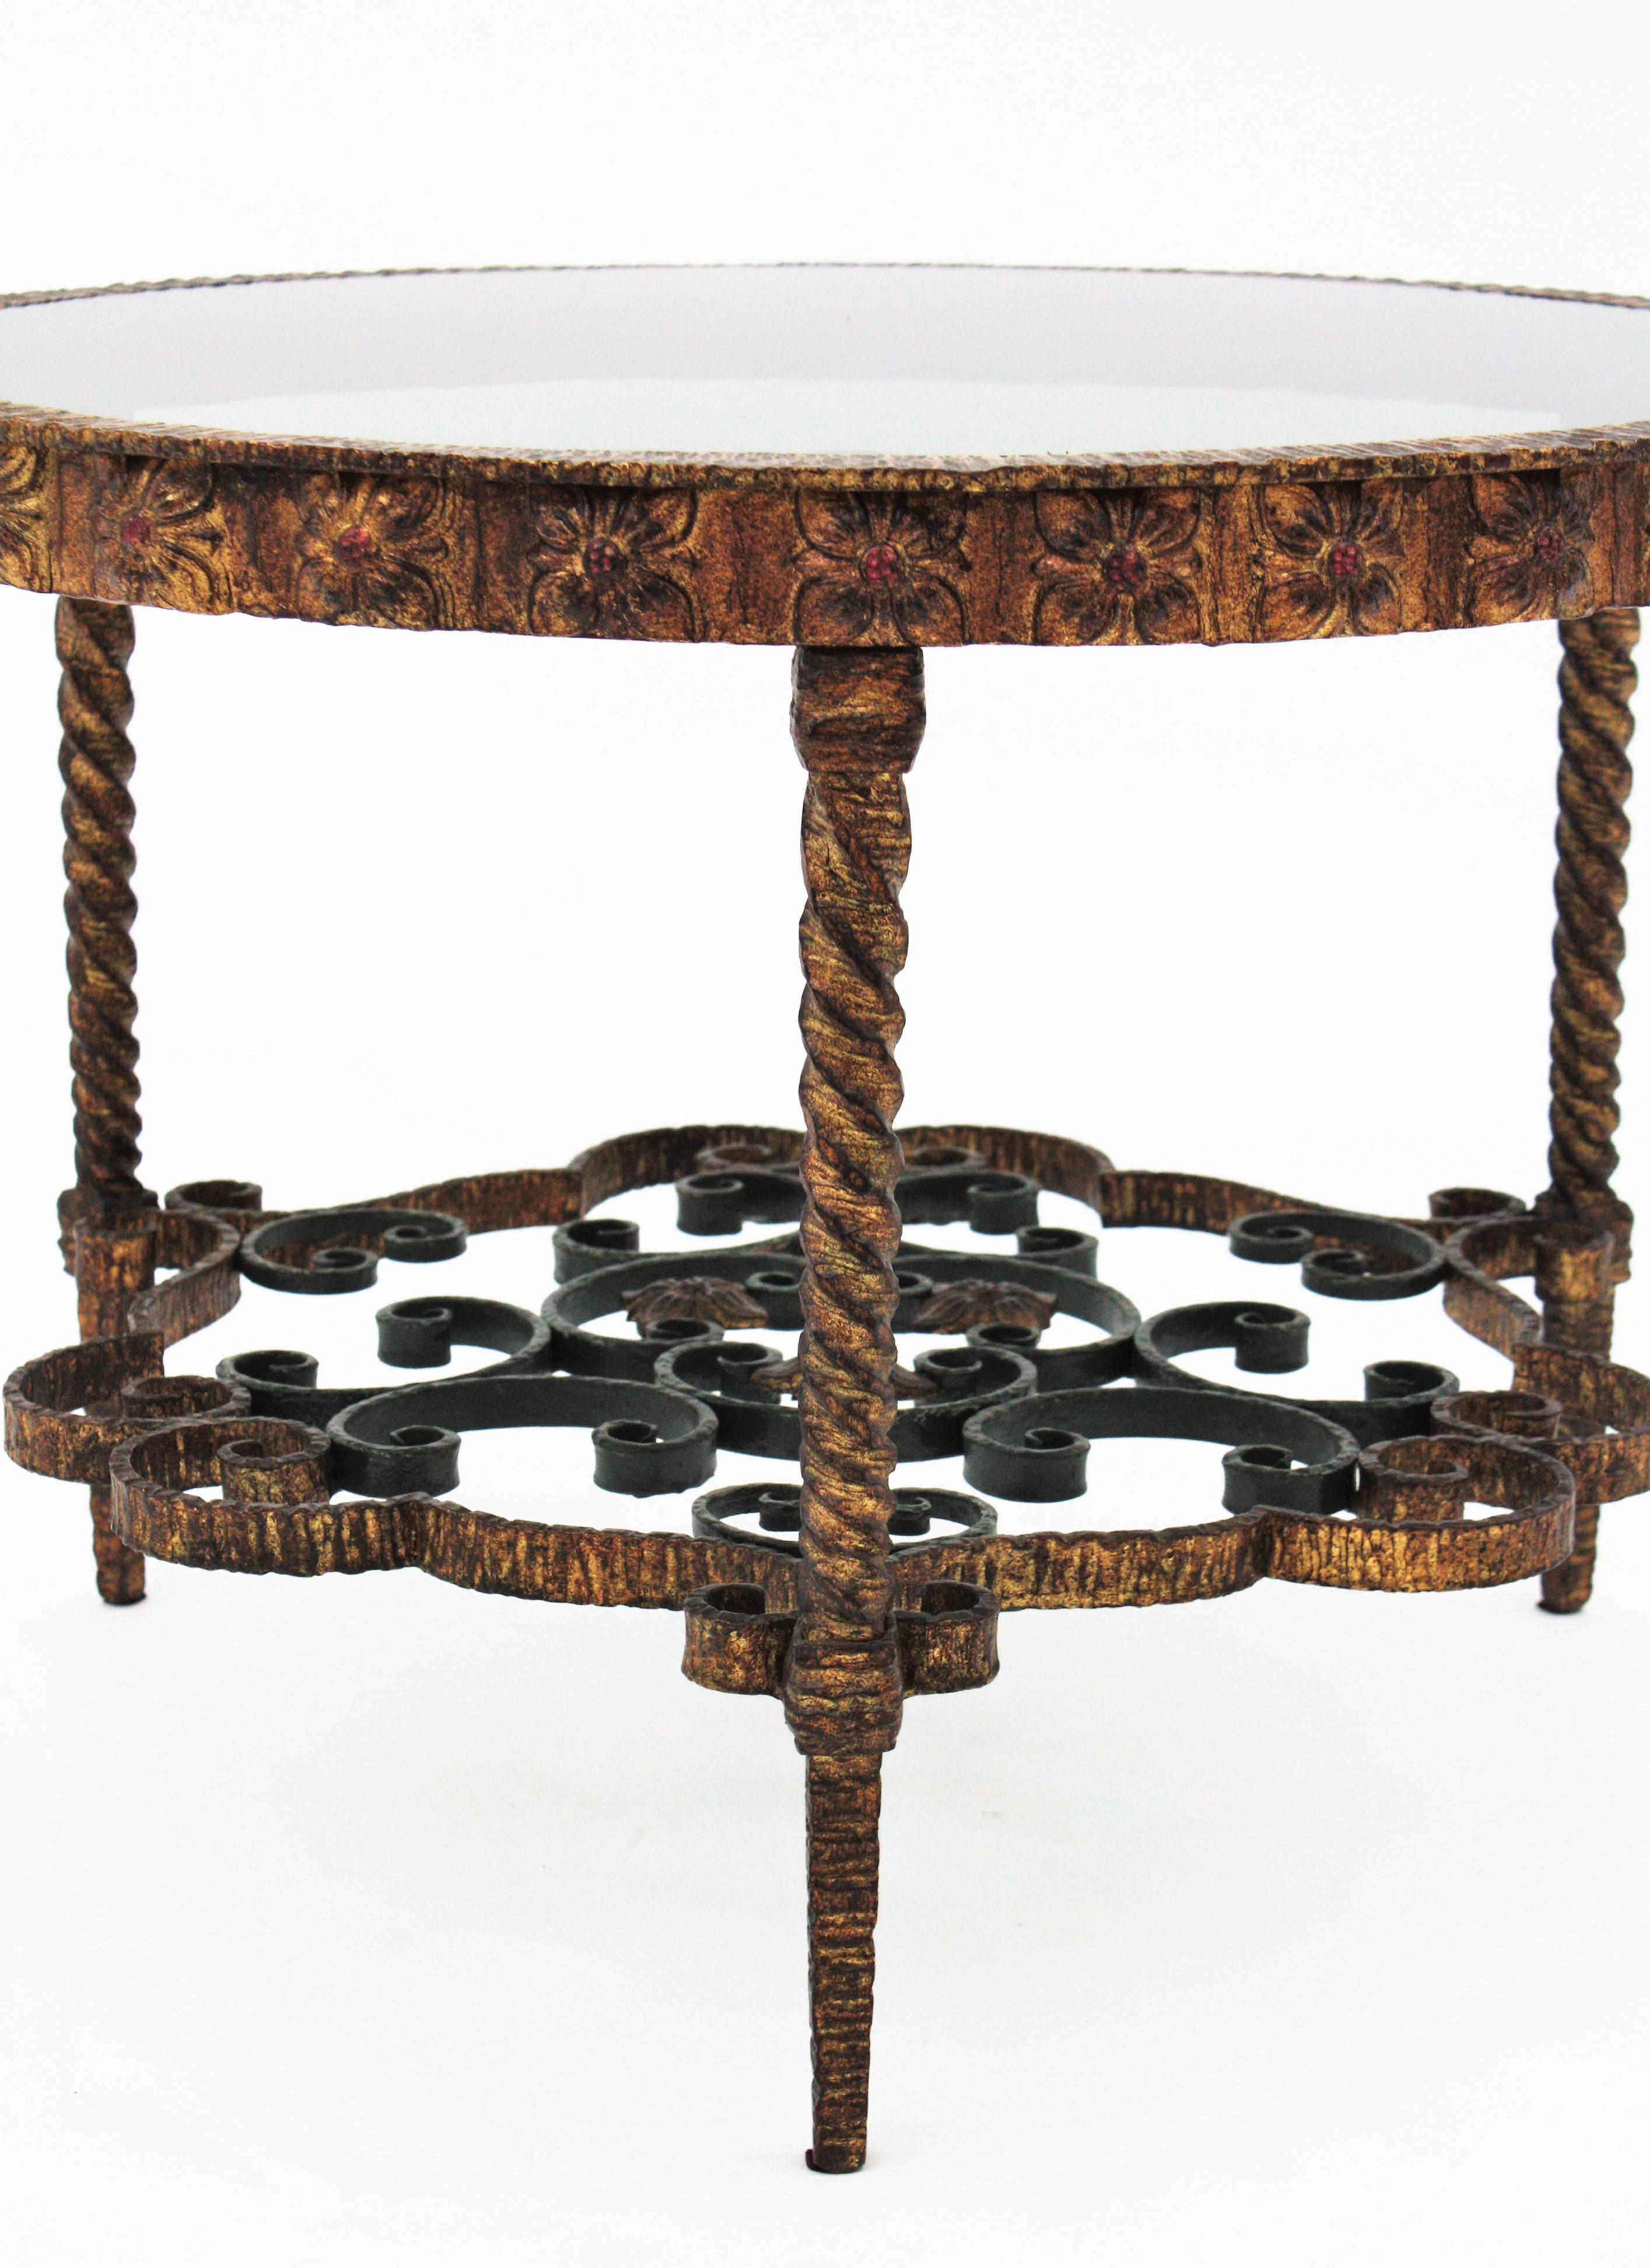 Gold Leaf Spanish Gilt Wrought Iron Coffee Table with Smoked Glass Top For Sale